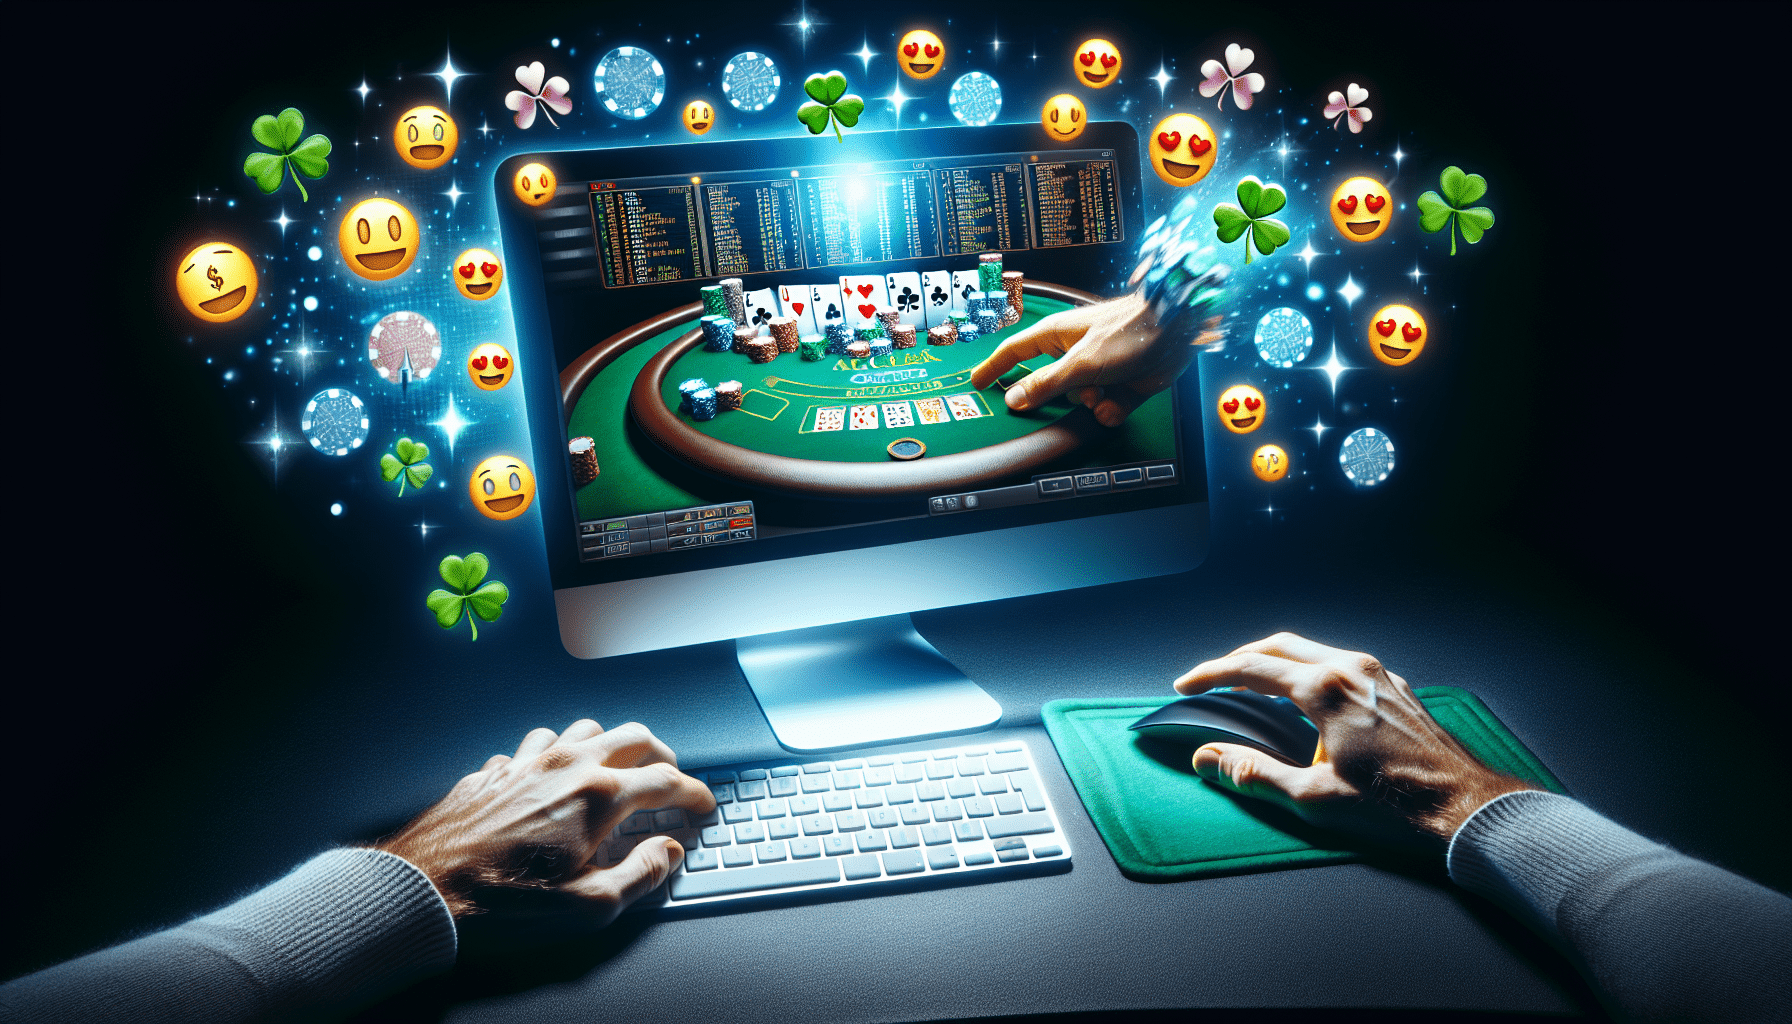 Can I Make A Living By Gambling Online?